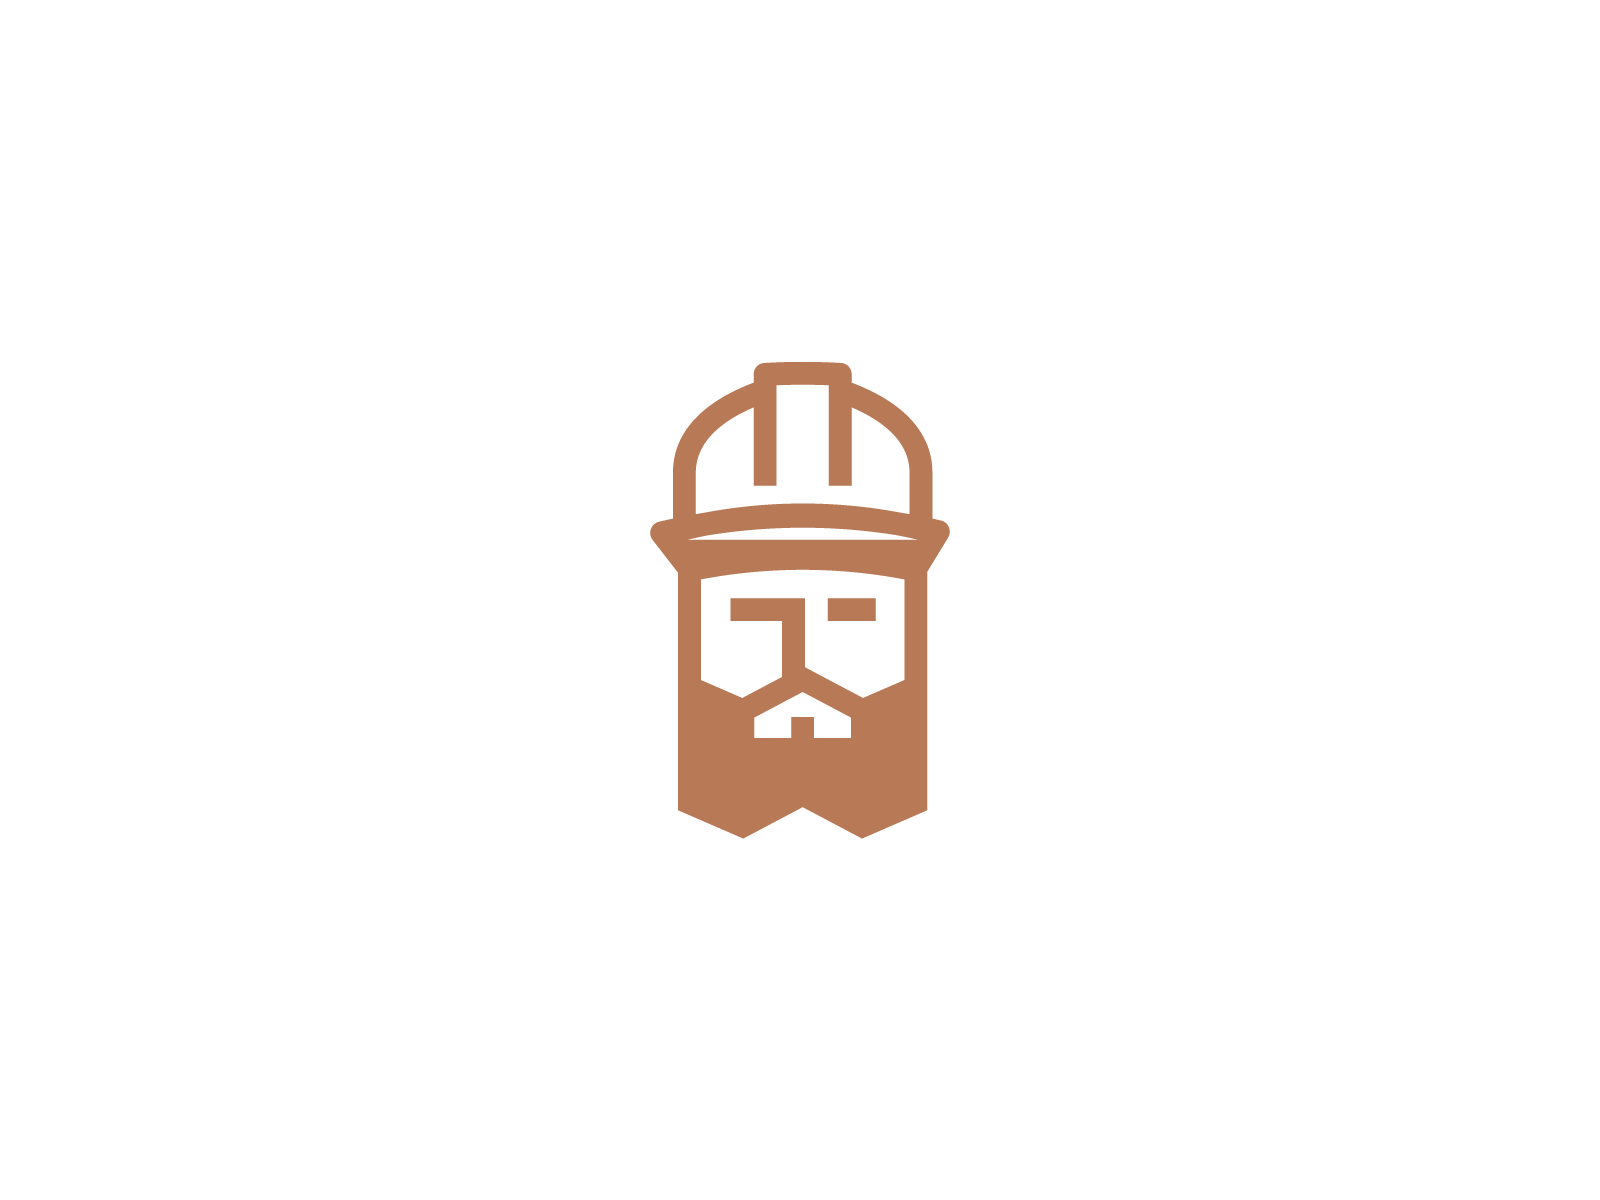 Construction Worker by Dalibor Pajic on Dribbble